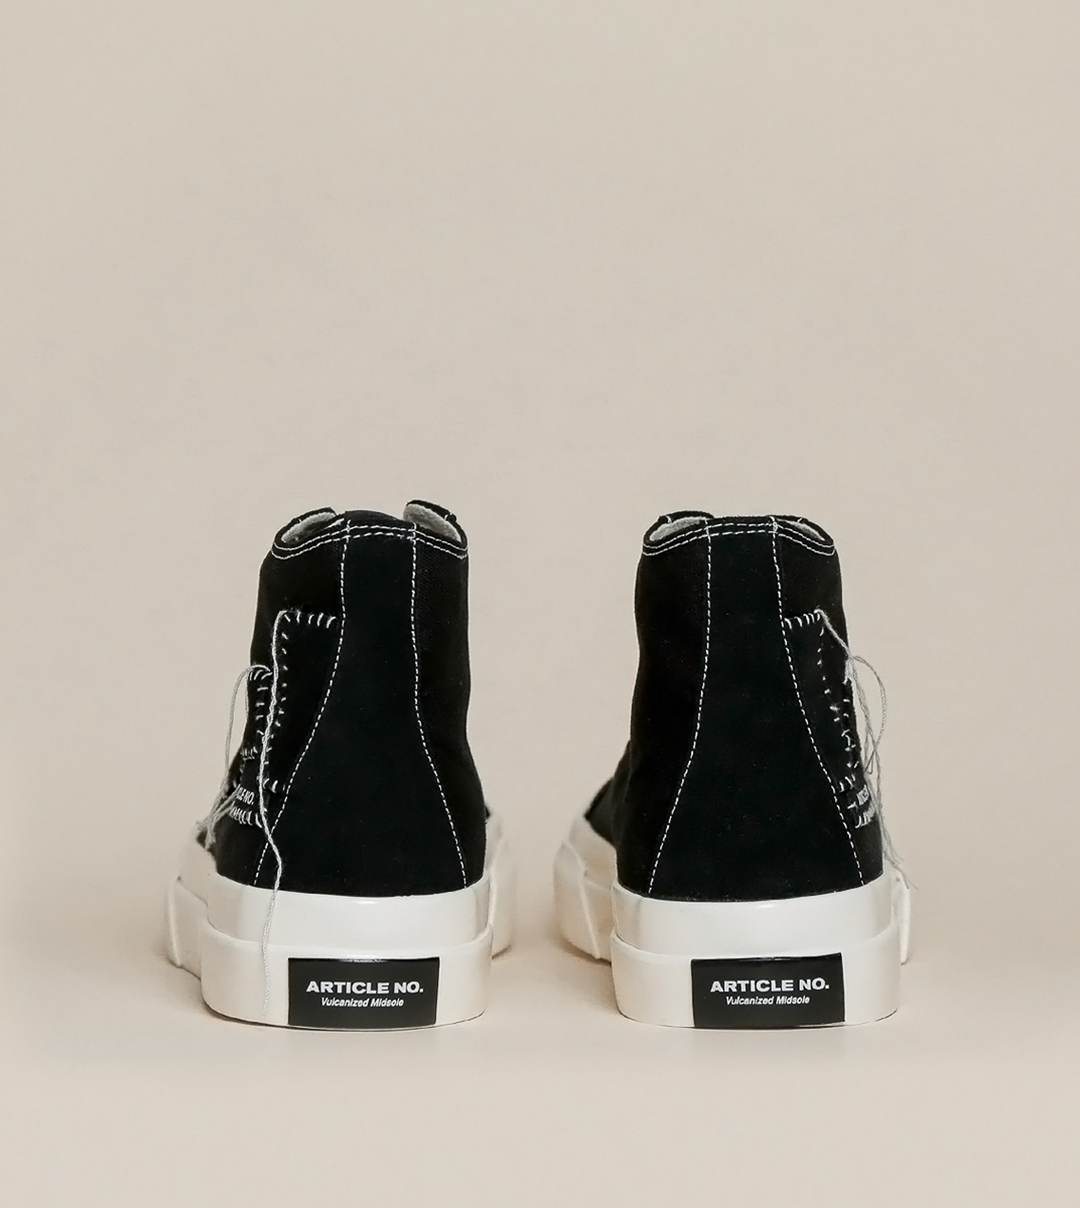 O.G. CLASSIC PATCHWORK HIGH-TOP BLACK SNEAKERS